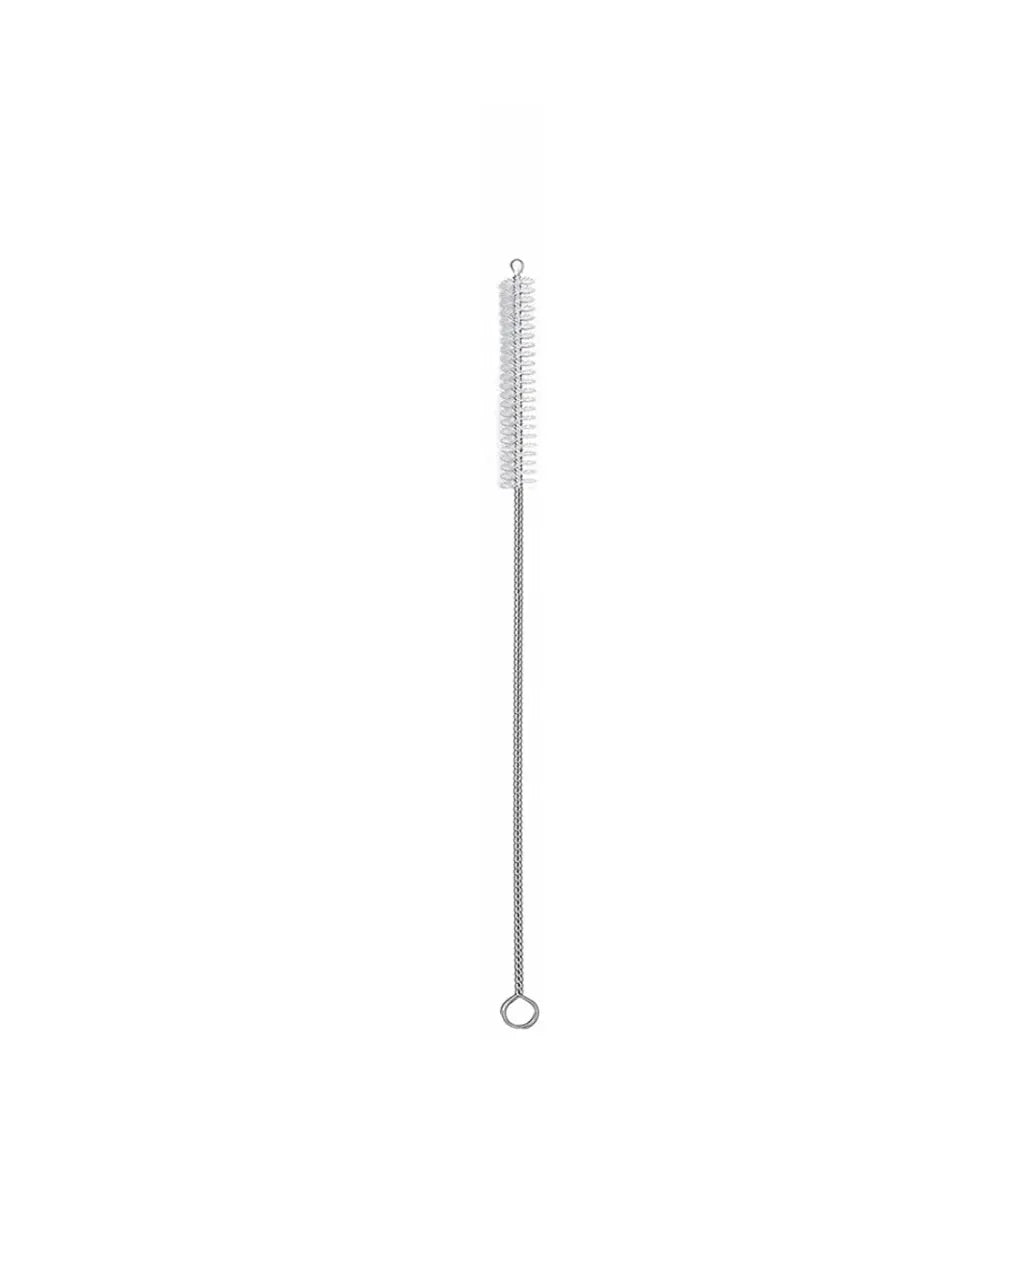 BENT AND STRAIGHT REUSABLE METAL STRAW WITH CLEANER - Crazy Kat Design Co